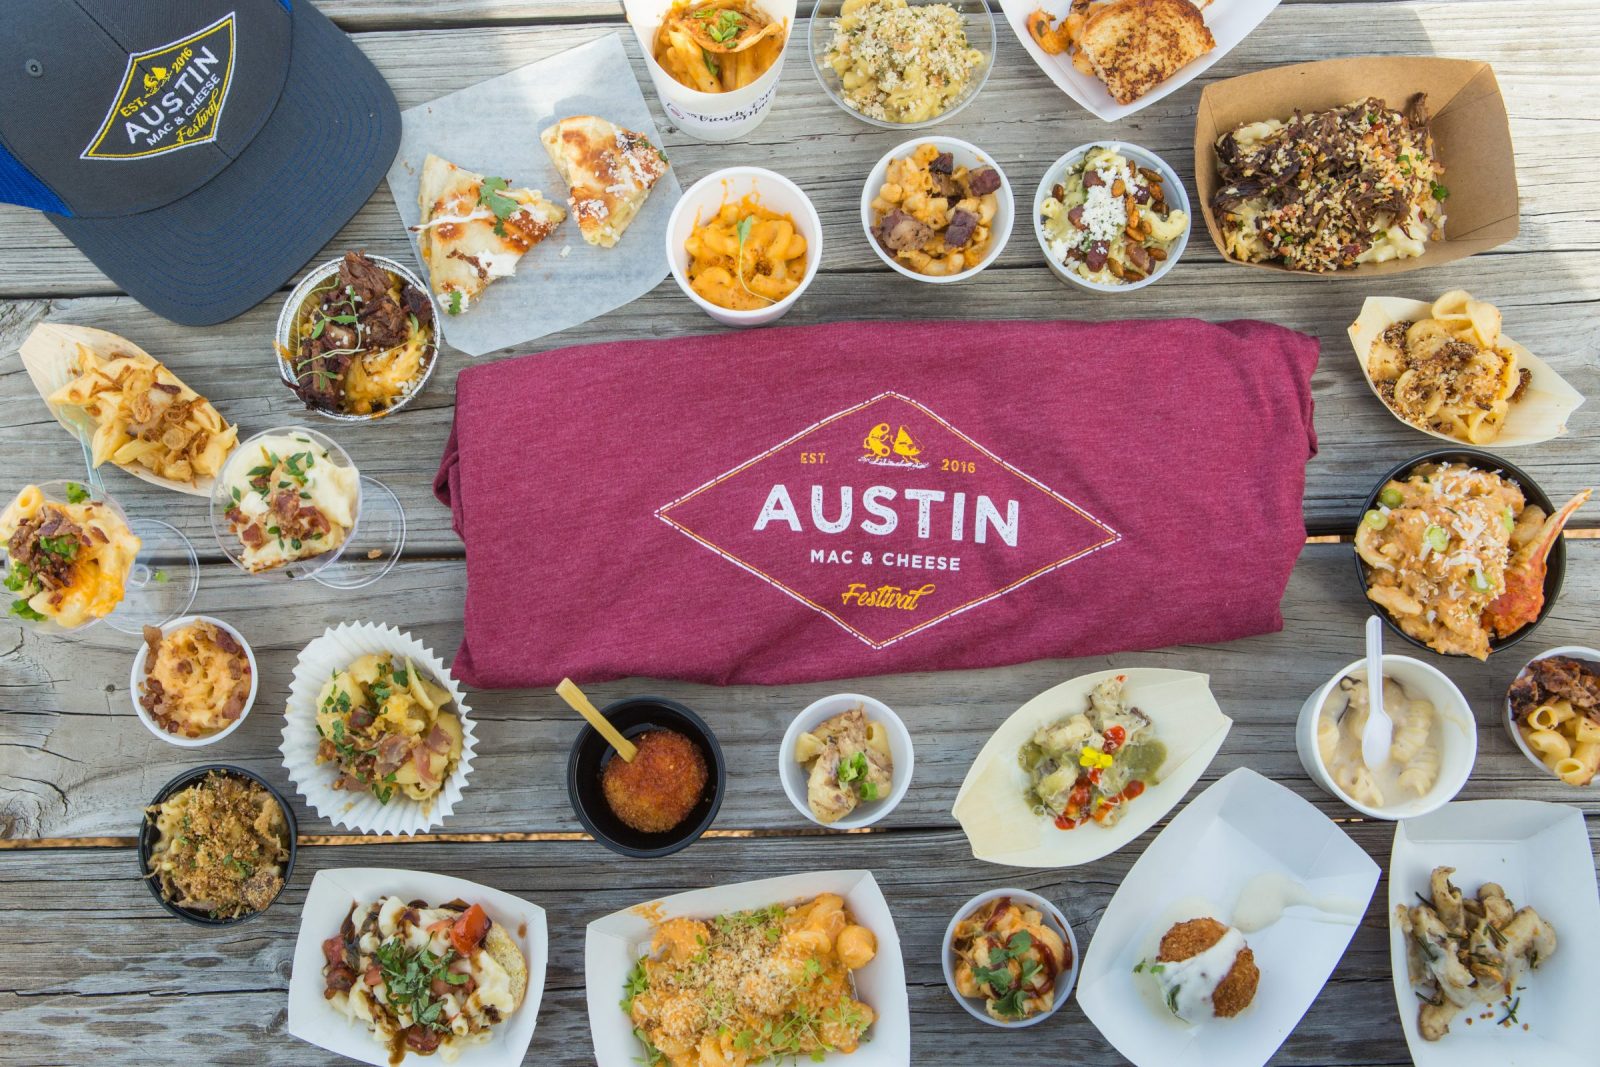 Austin Mac and Cheese Fest 2017 by Courtney Pierce